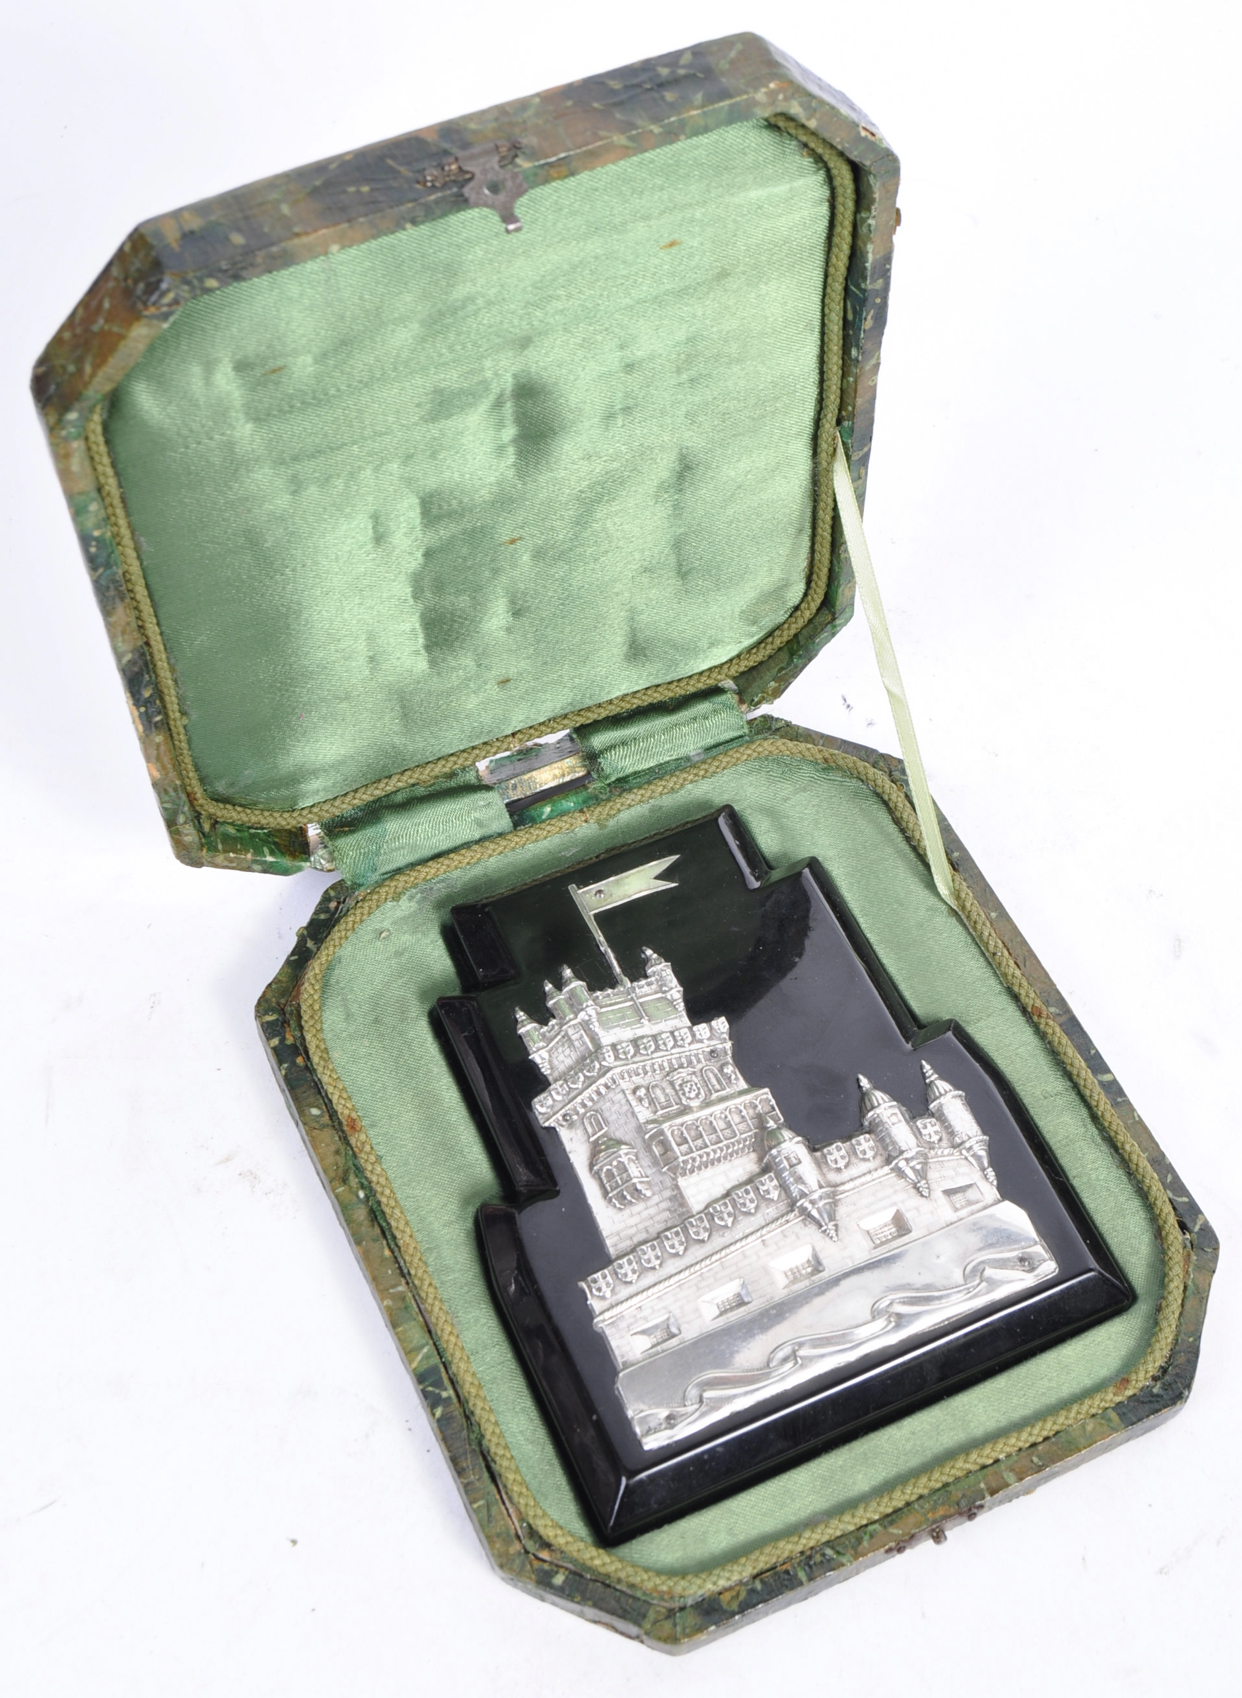 Spanish castle paperweight - Image 6 of 9